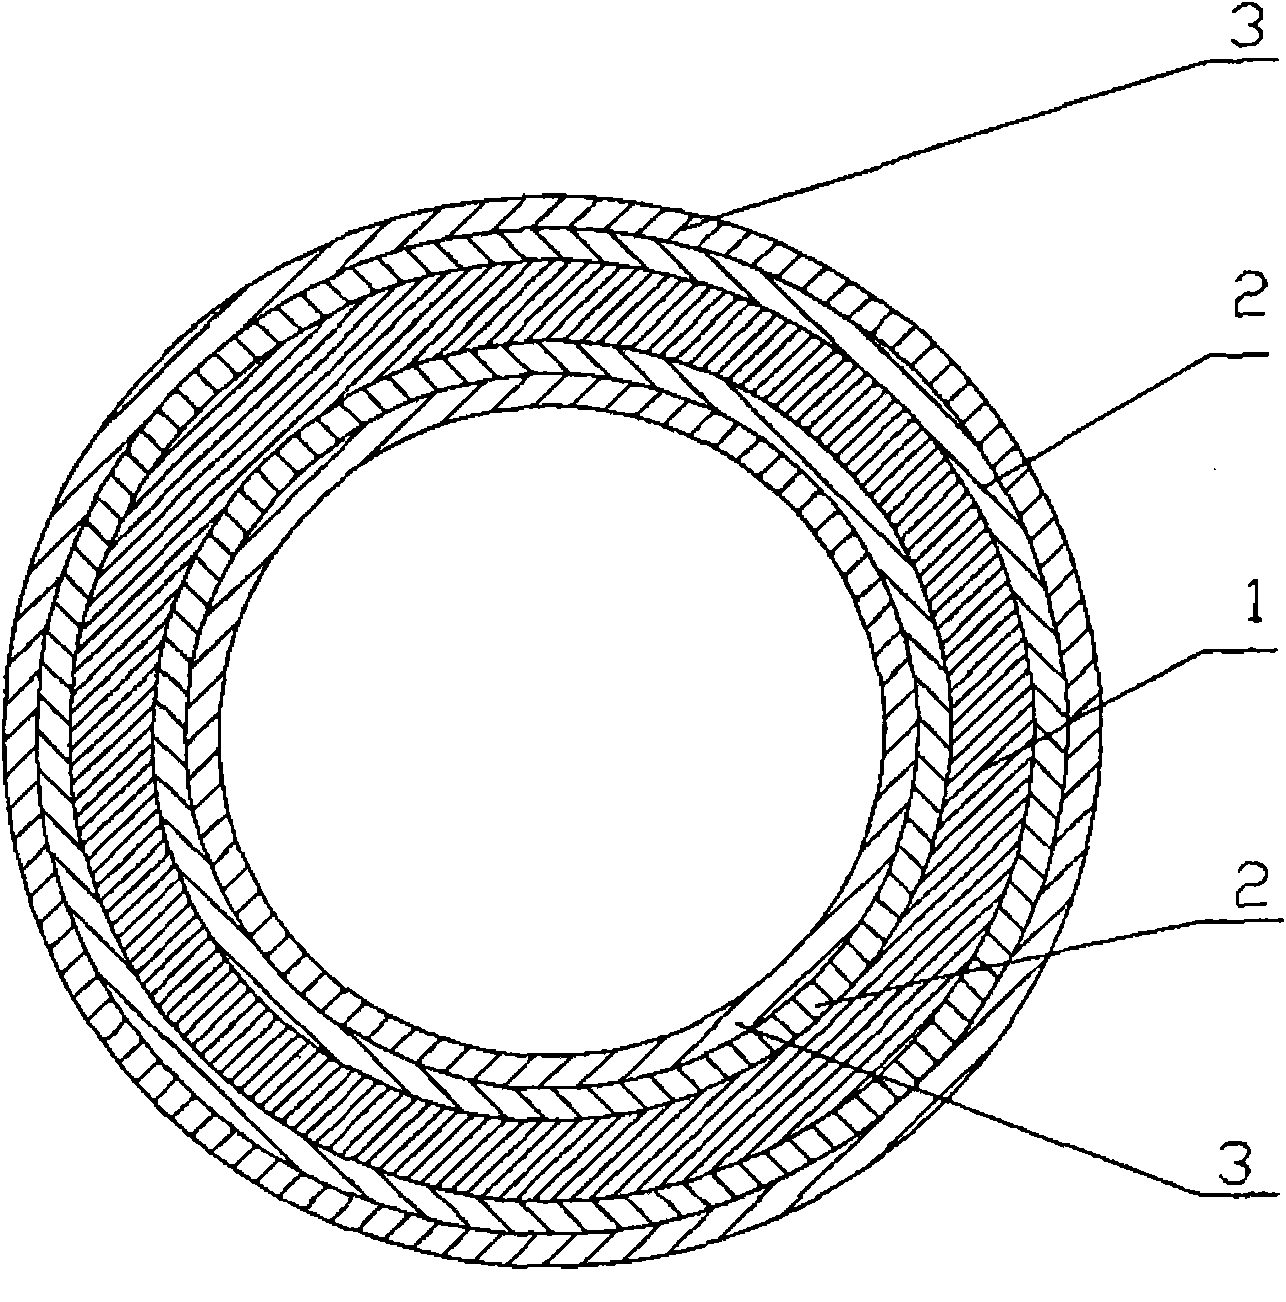 Anticorrosion pipe provided with alloy layers